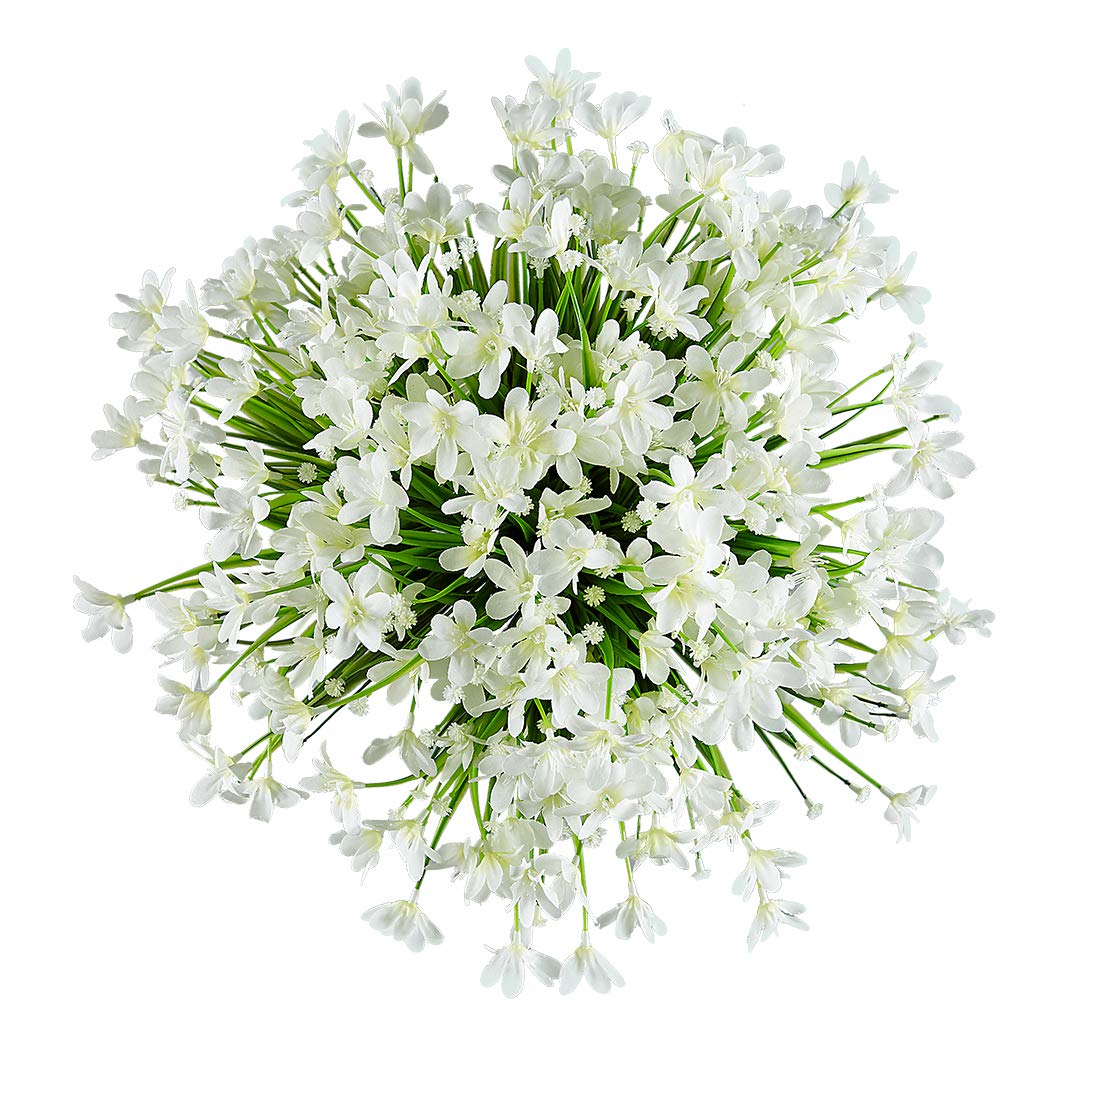 HAPLIA 8 Bundles Artificial Daffodils Flowers, Fake Artificial Greenery UV Resistant No Fade Faux Plastic Plants for Wedding Bridle Bouquet Indoor Outdoor Home Garden Kitchen Office Table Vase (White)